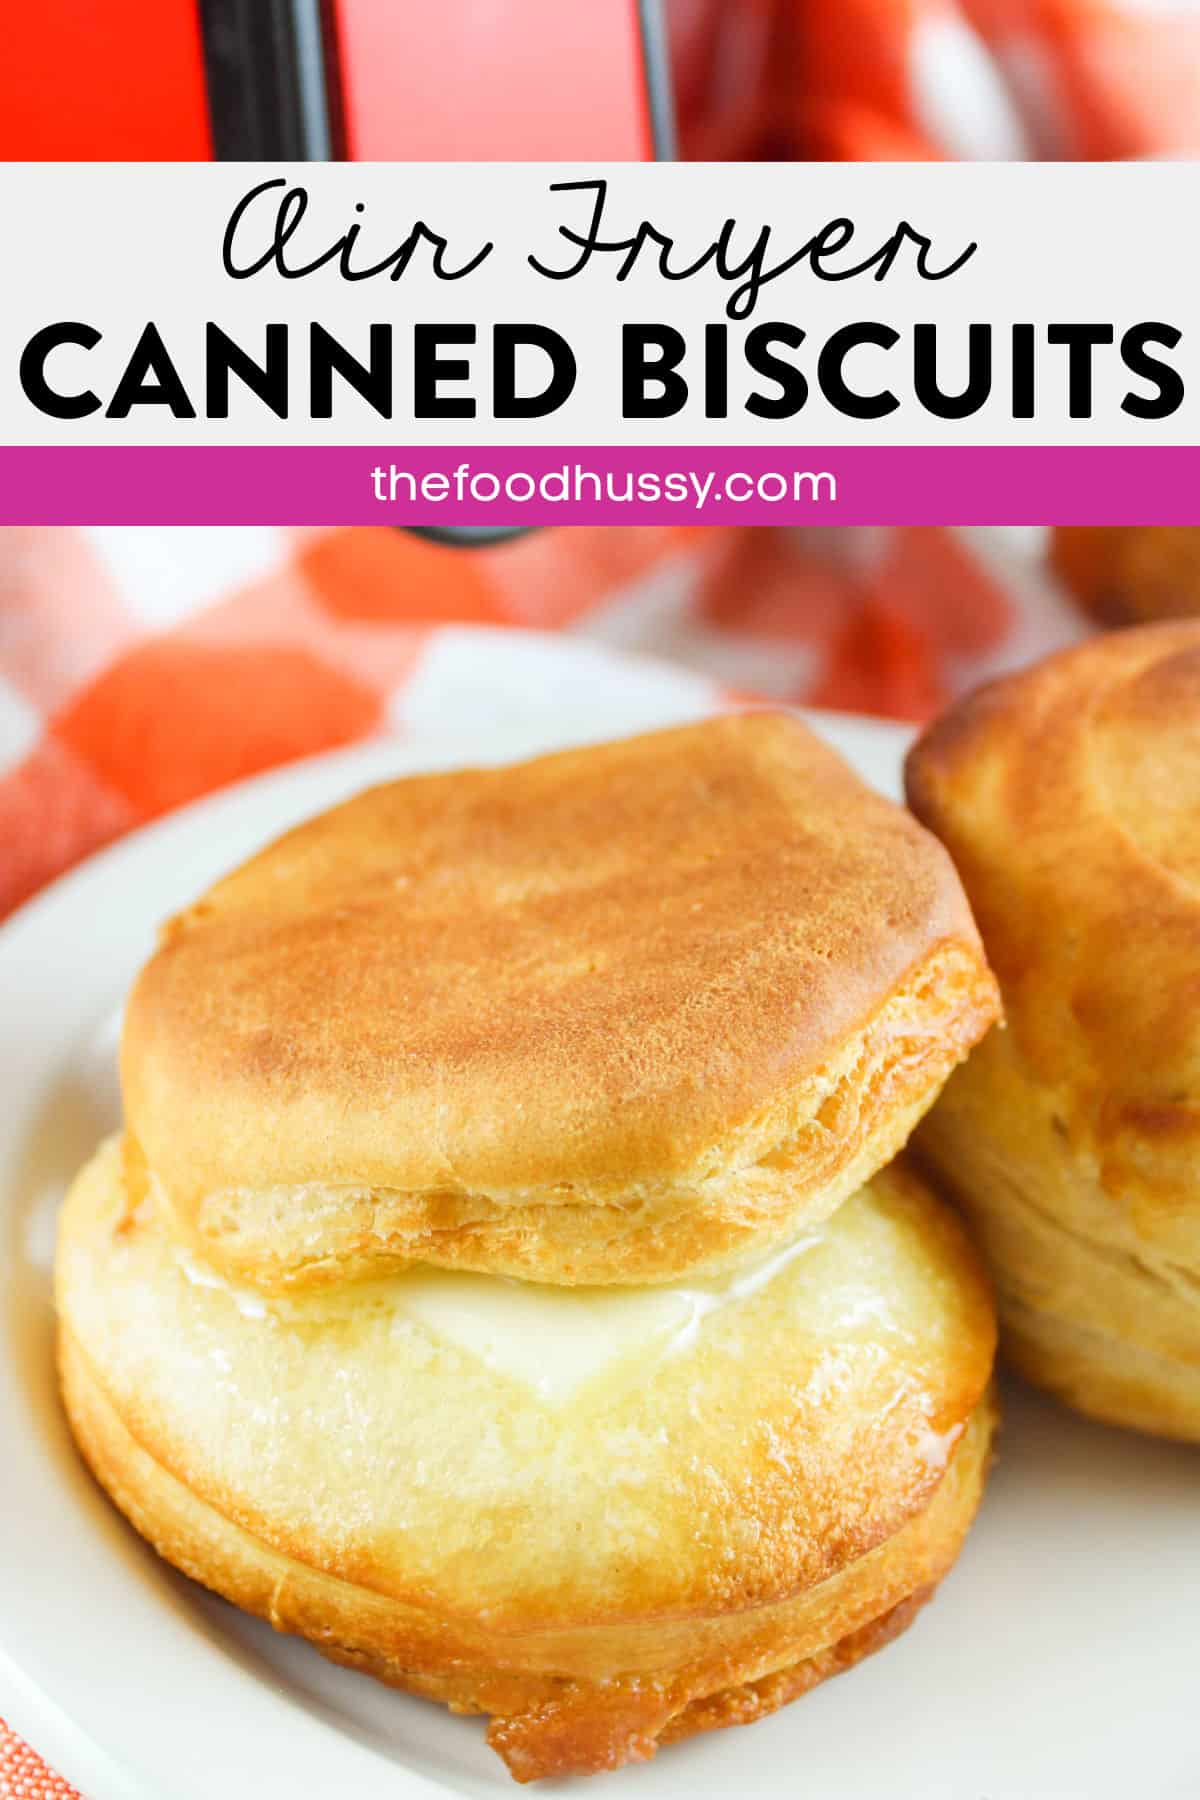 Lots of folks ask me if you can air fry canned biscuits? The answer is a resounding YES! Refrigerated biscuits are a great side dish for any meal and making them in the air fryer saves time (and is great for reheating as well!).  via @foodhussy